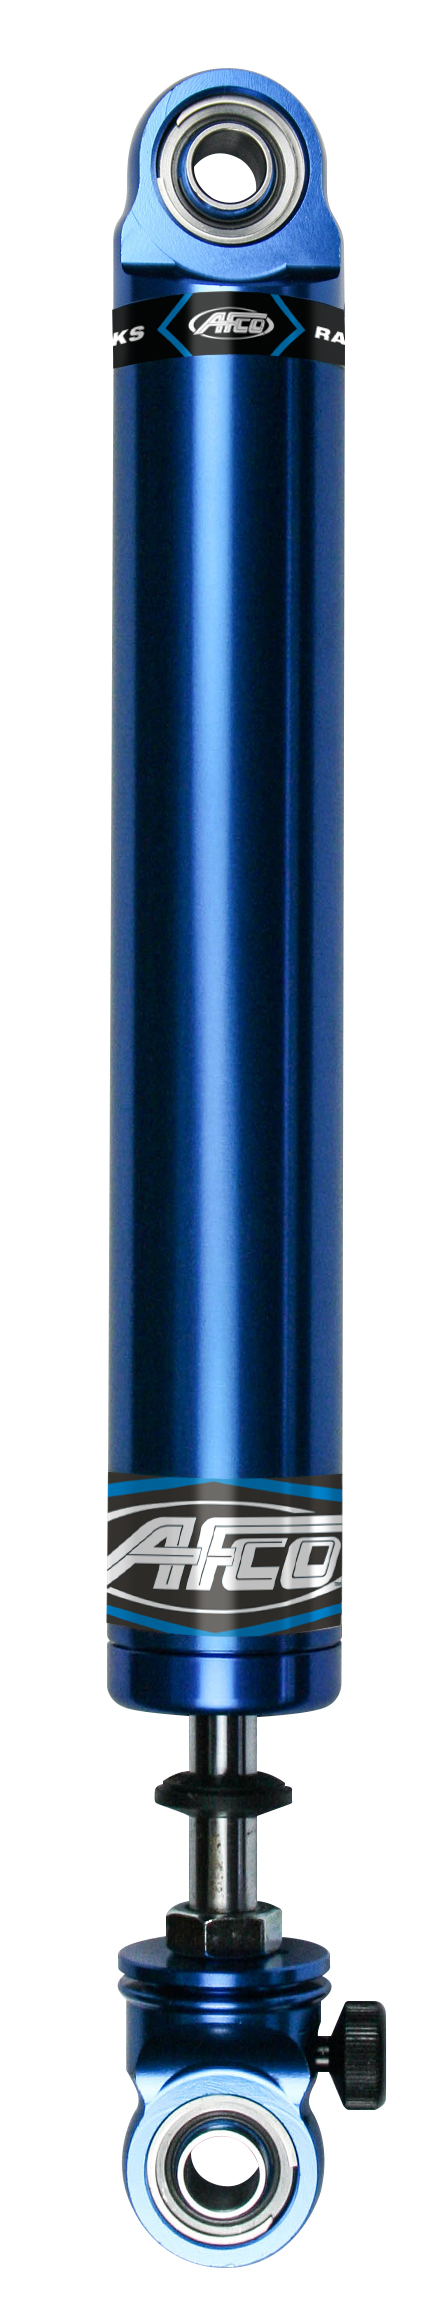 Aluminum Shock Twin Tube 16 Series Small Body 6 Inch Comp 3/Reb 4-8 Smooth